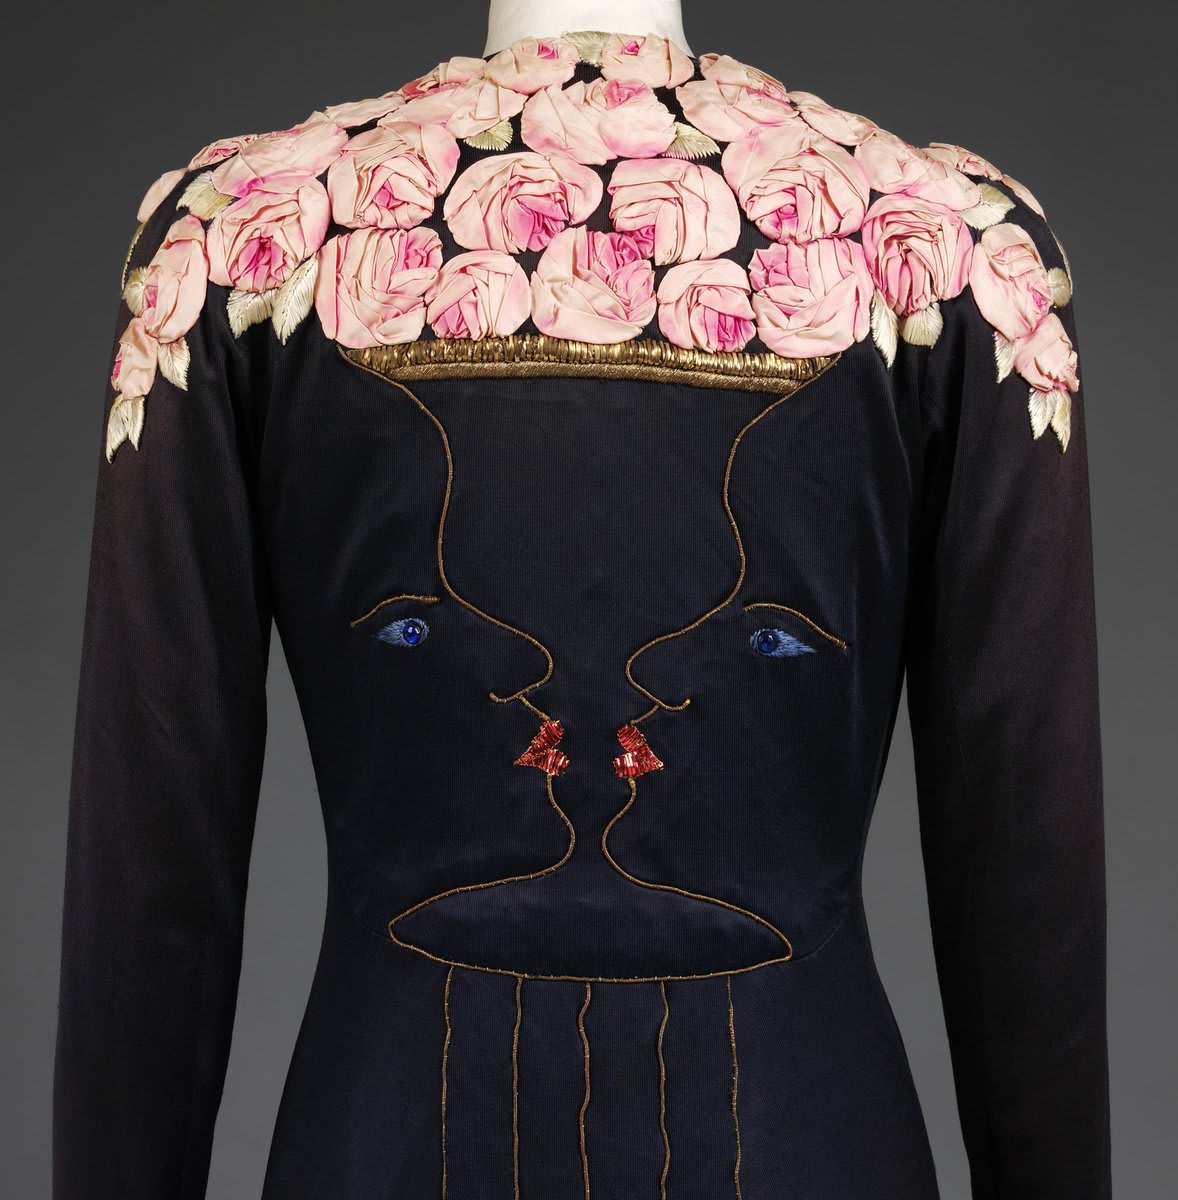 What can you see, a vase of roses or two faces? Elsa Schiaparelli was one of the most prominent fashion designers in the 1920s-1940s. This evening coat was the result of a magnificent collaboration with Jean Cocteau.